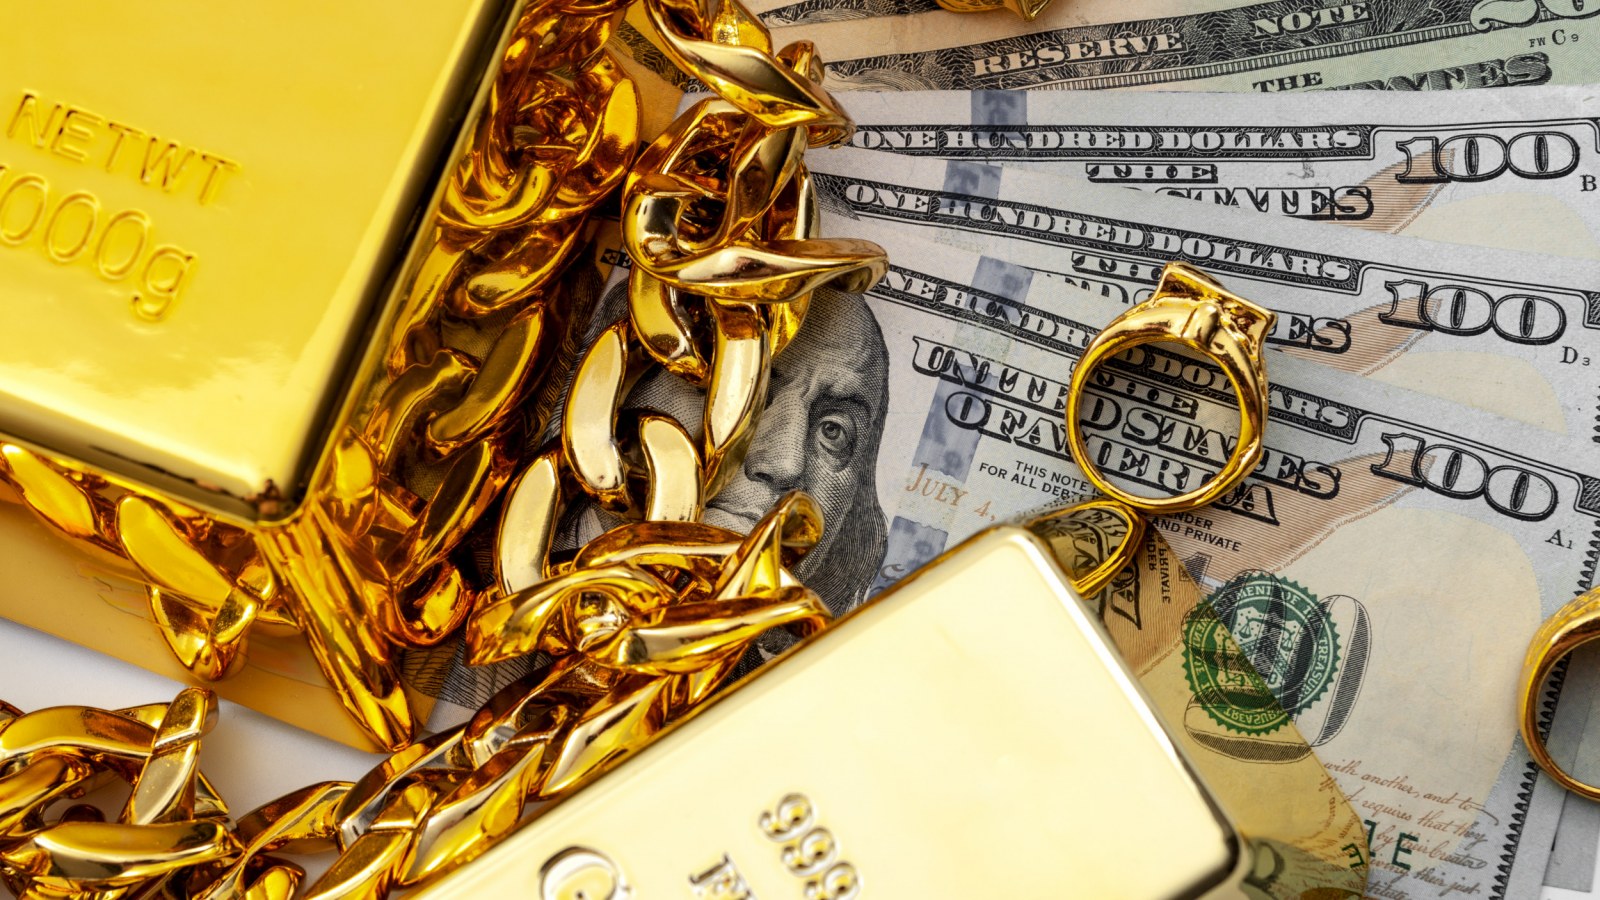 Cash For Gold - New Liberty Loans Pawn Shop